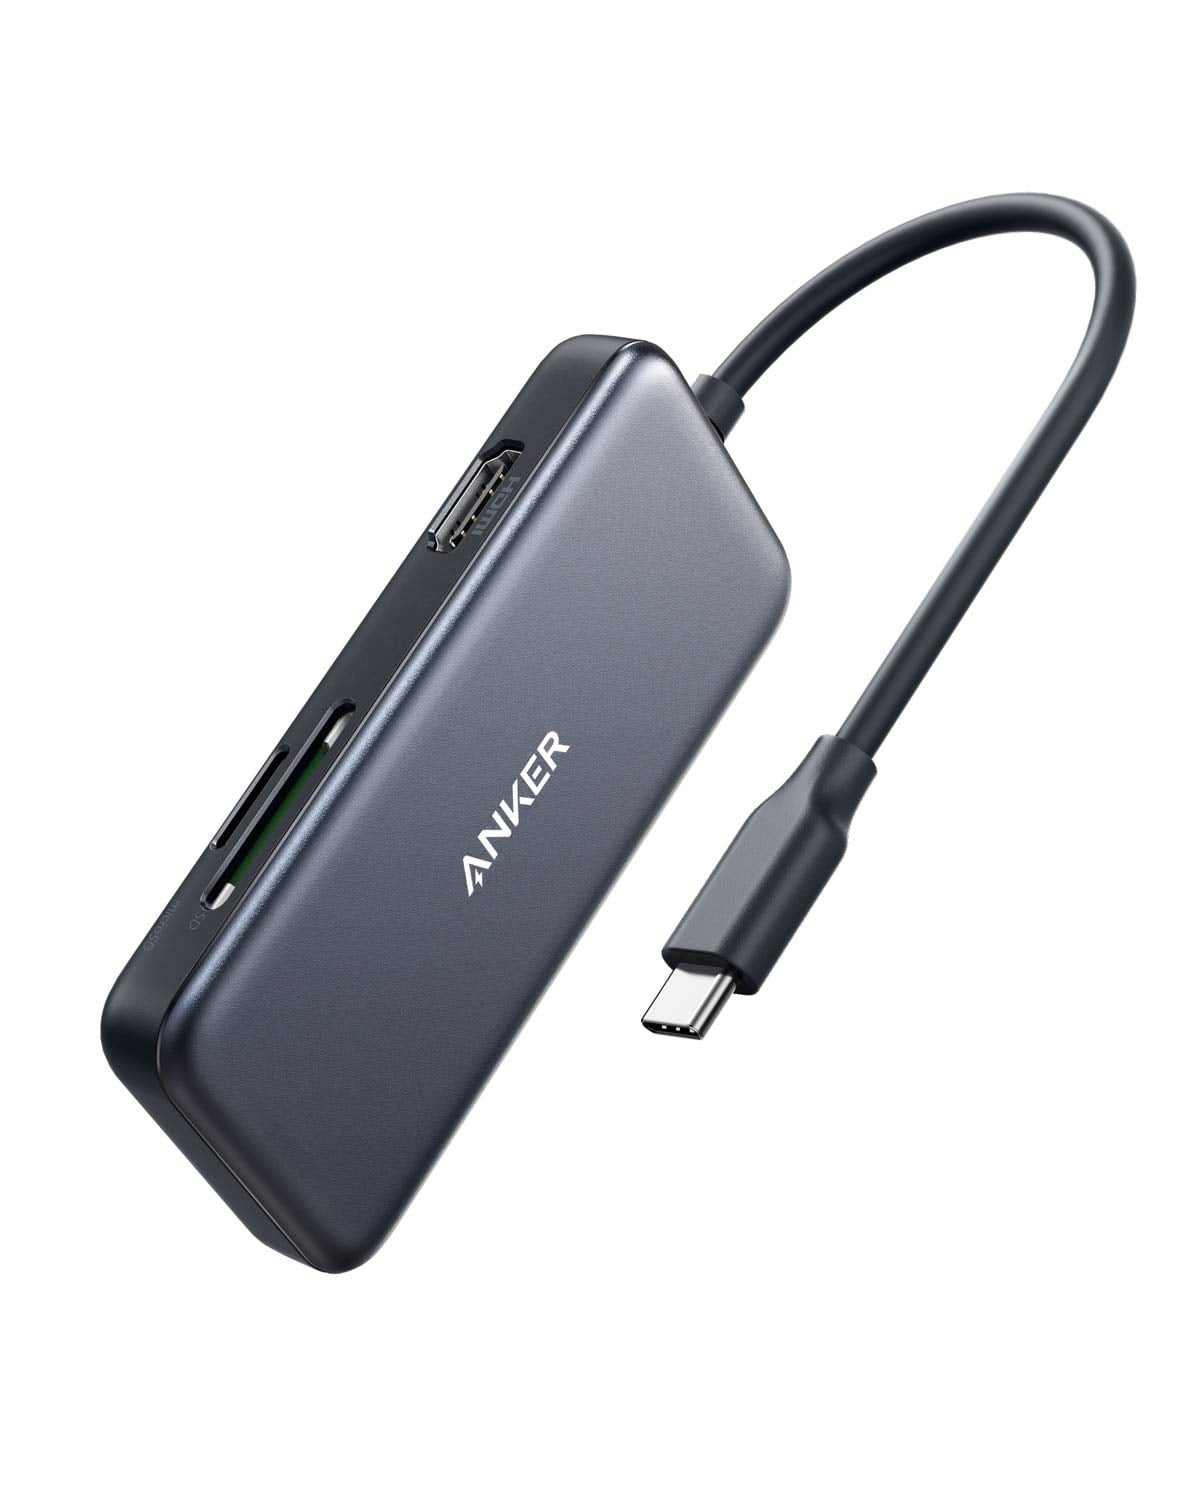 Review: Anker 2-in-1 USB C to SD/Micro SD Card Reader - Product Reviews -  Anker Community